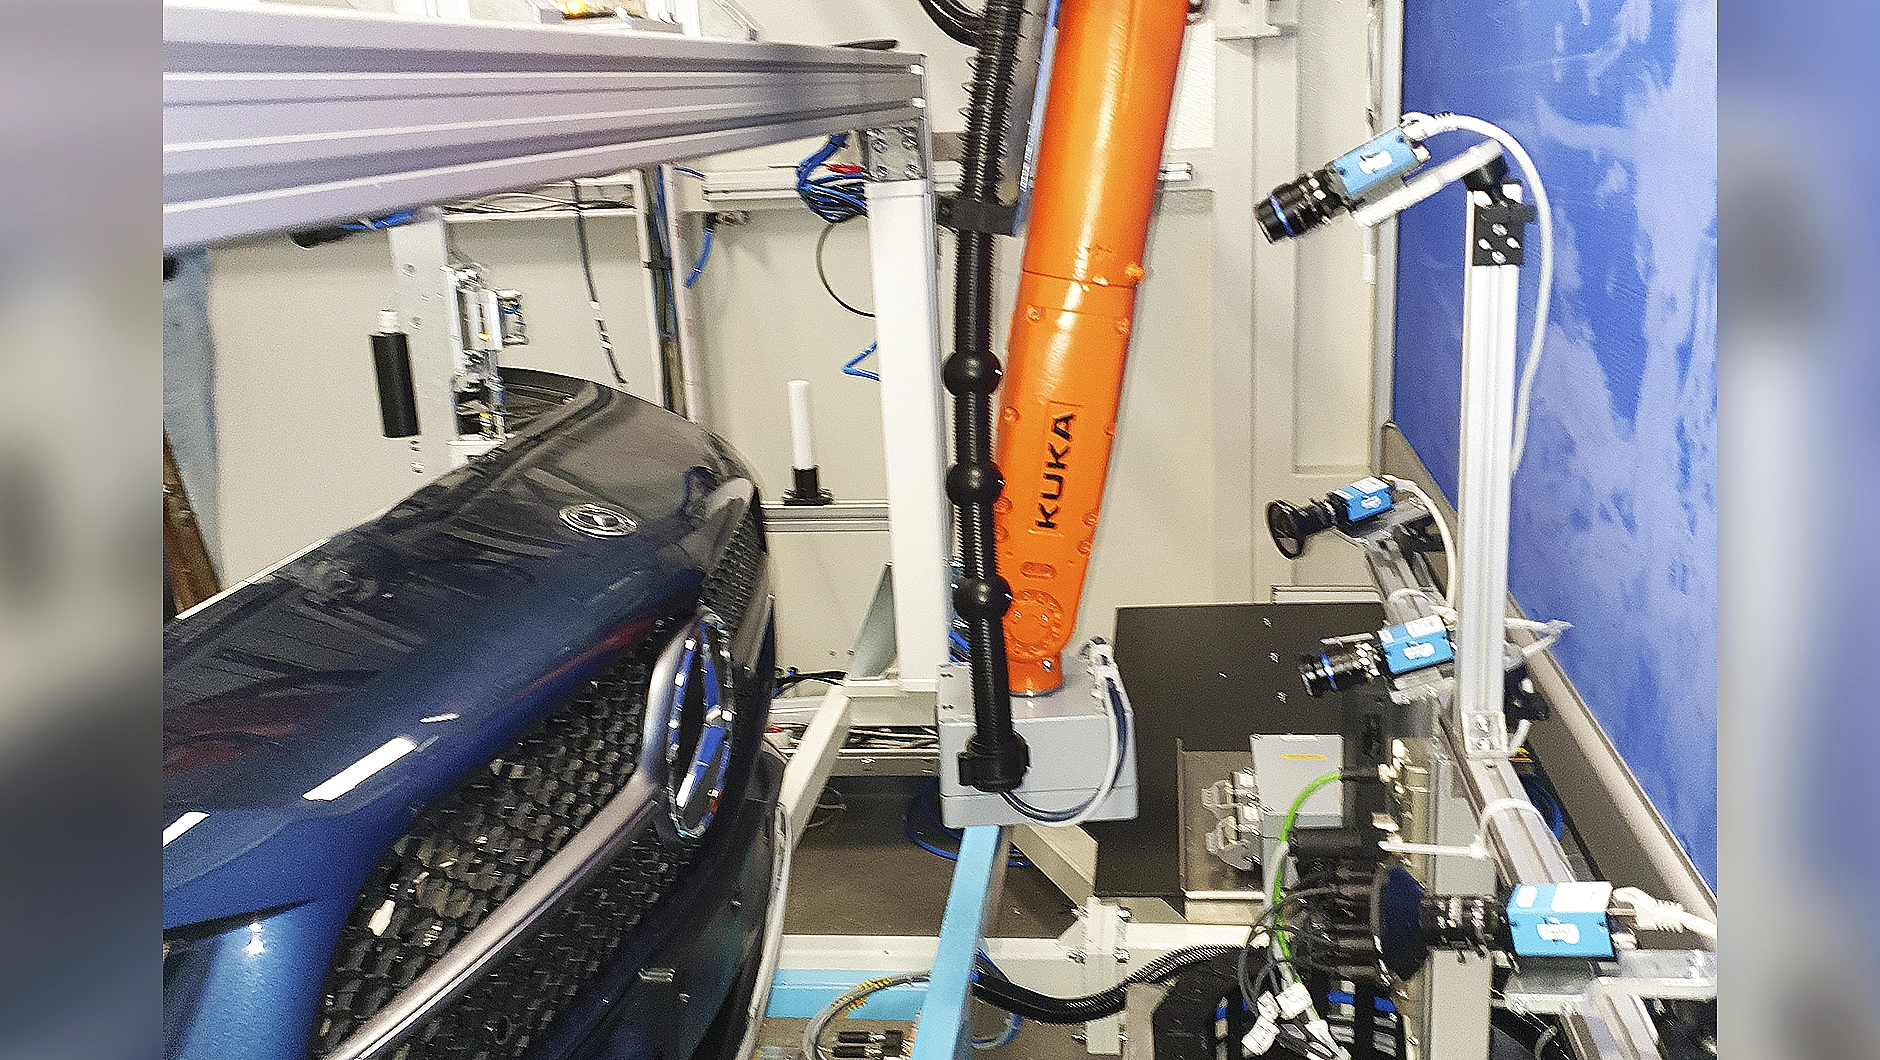 "Know how to test it": ITgroup's slogan underlines the complexity of the testing landscape. Here a multi-camera system and 3D-enabled robot inspect a car bumper for a variety of defects. (Image courtesy of ITgroup.)